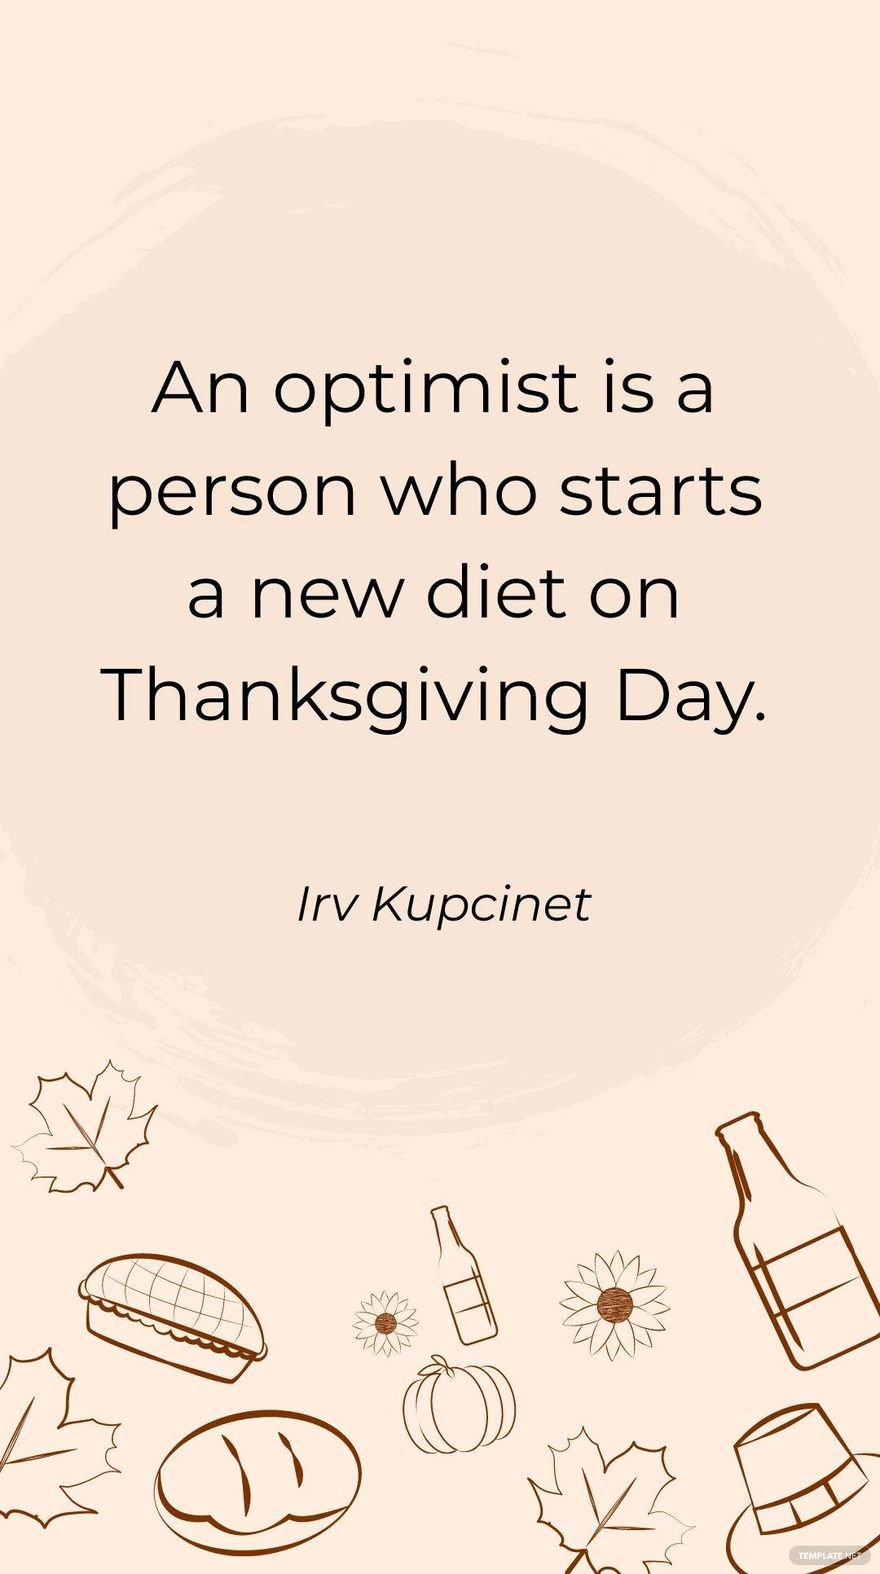 Free Irv Kupcinet - An optimist is a person who starts a new diet on Thanksgiving Day. in JPG